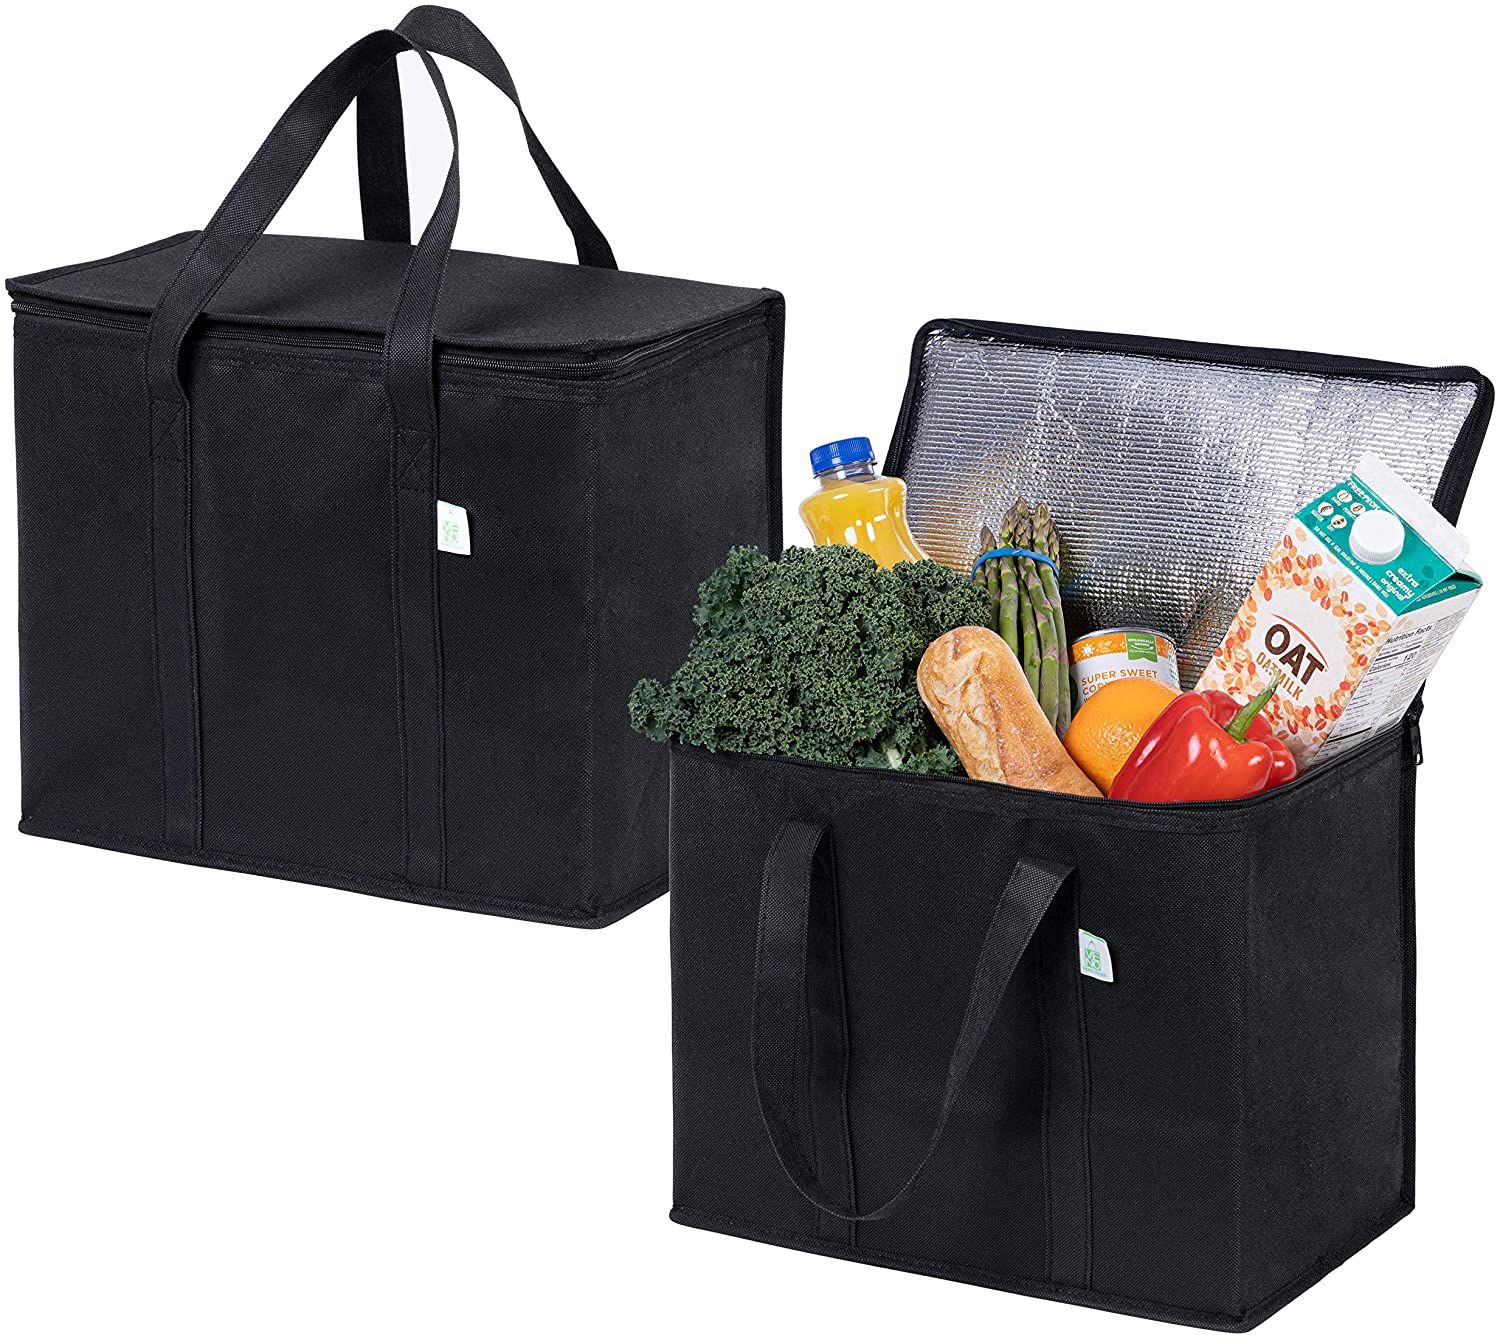 Steel Gray Reusable Grocery Tote Bag Large 10 Pack